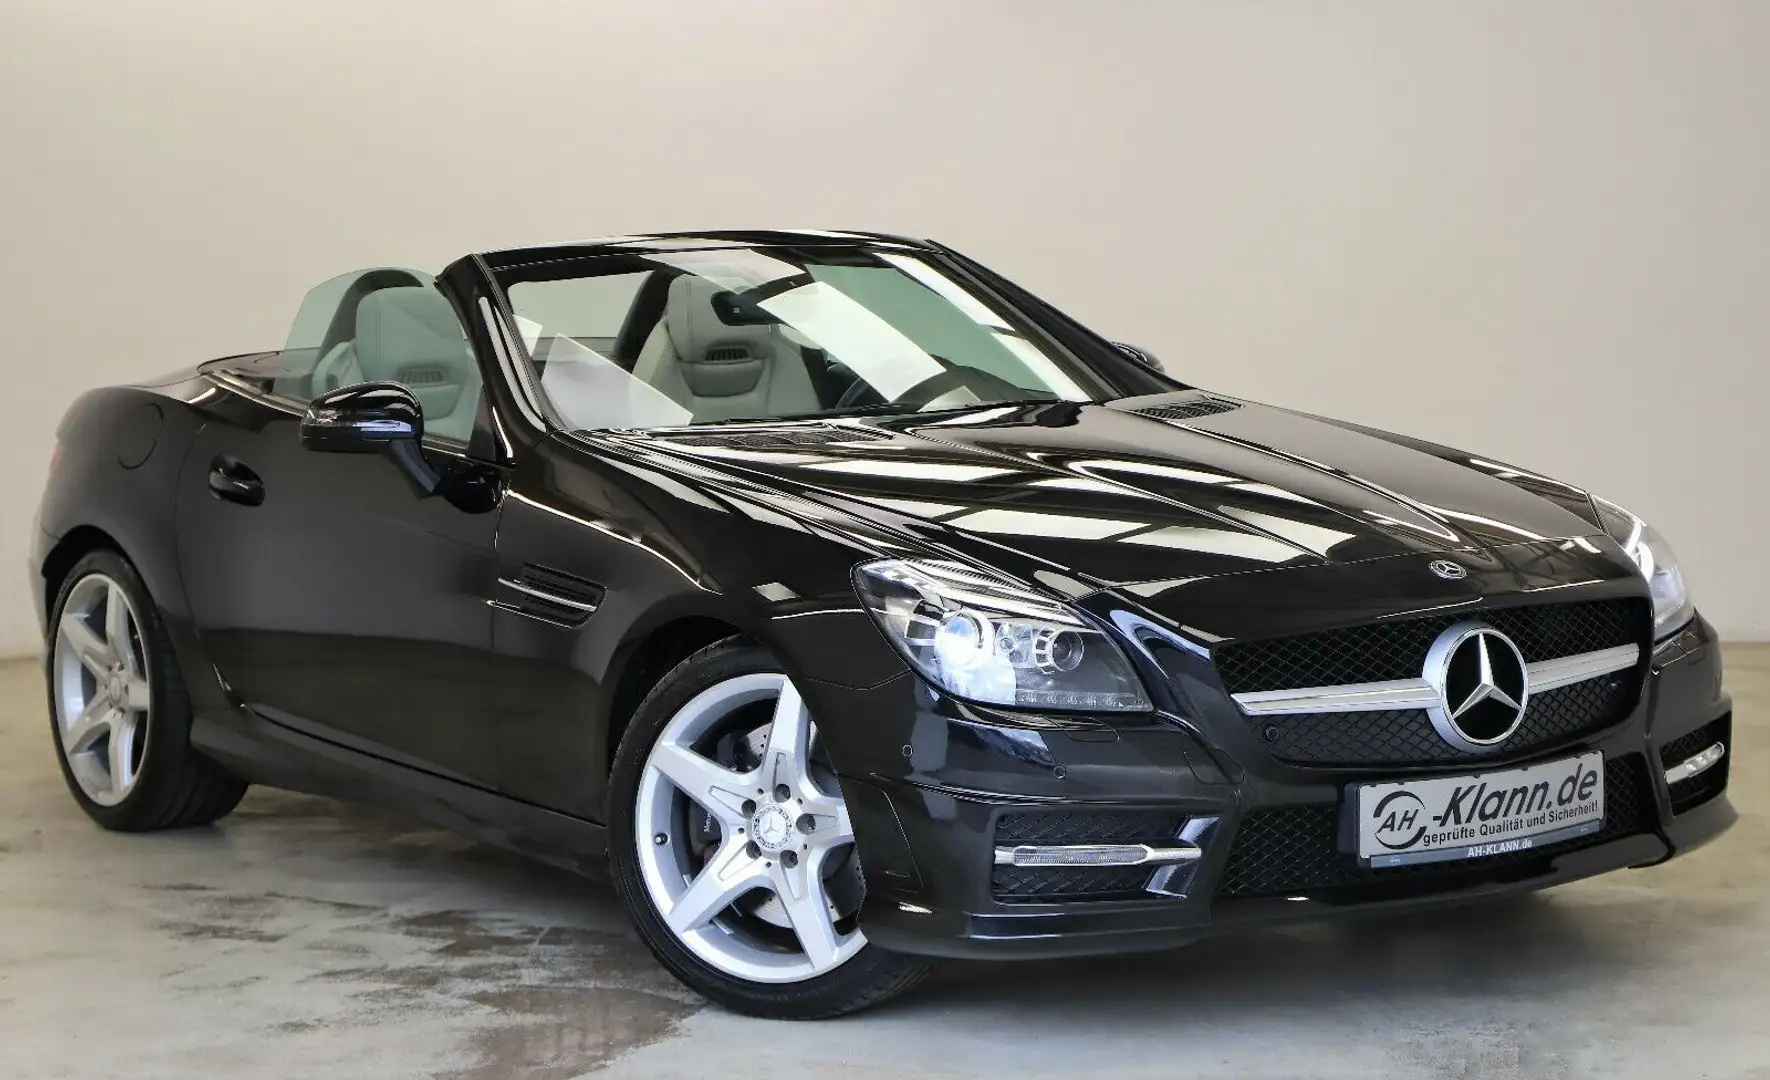 Mercedes-Benz SLK 250 CDI BE 204PS Roadster AMG Line Panorama crna - 1